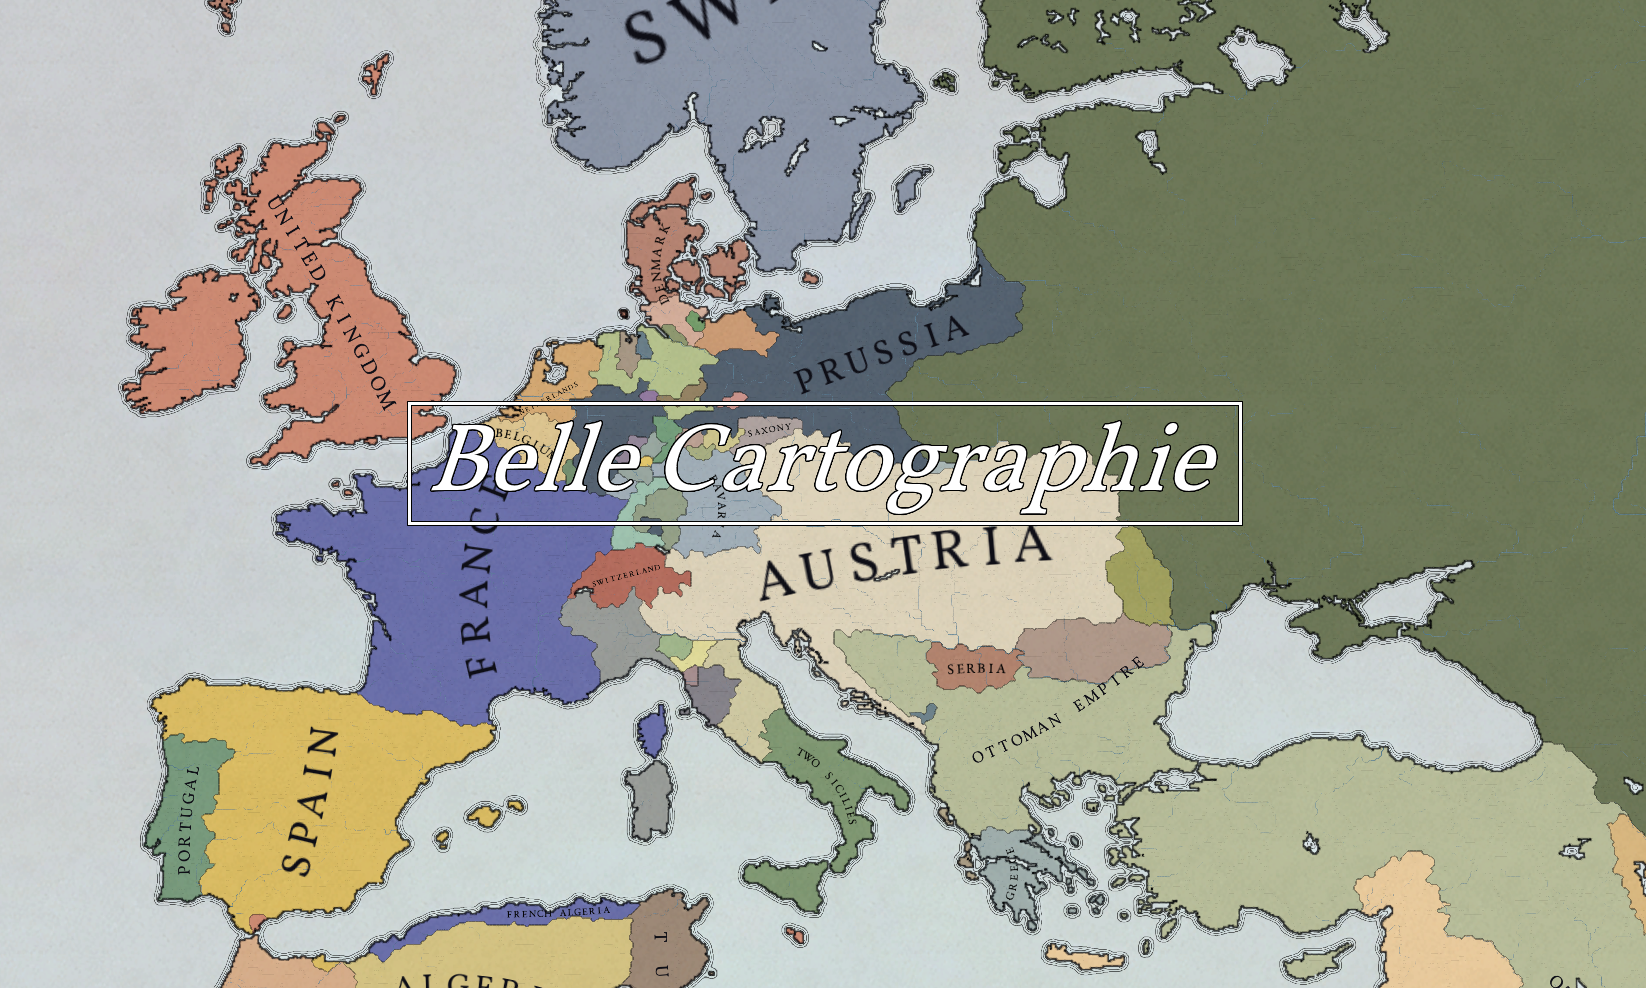 dynasty Subjective Deplete Belle Cartographie mod for Victoria 2: Heart of Darkness - Mod DB